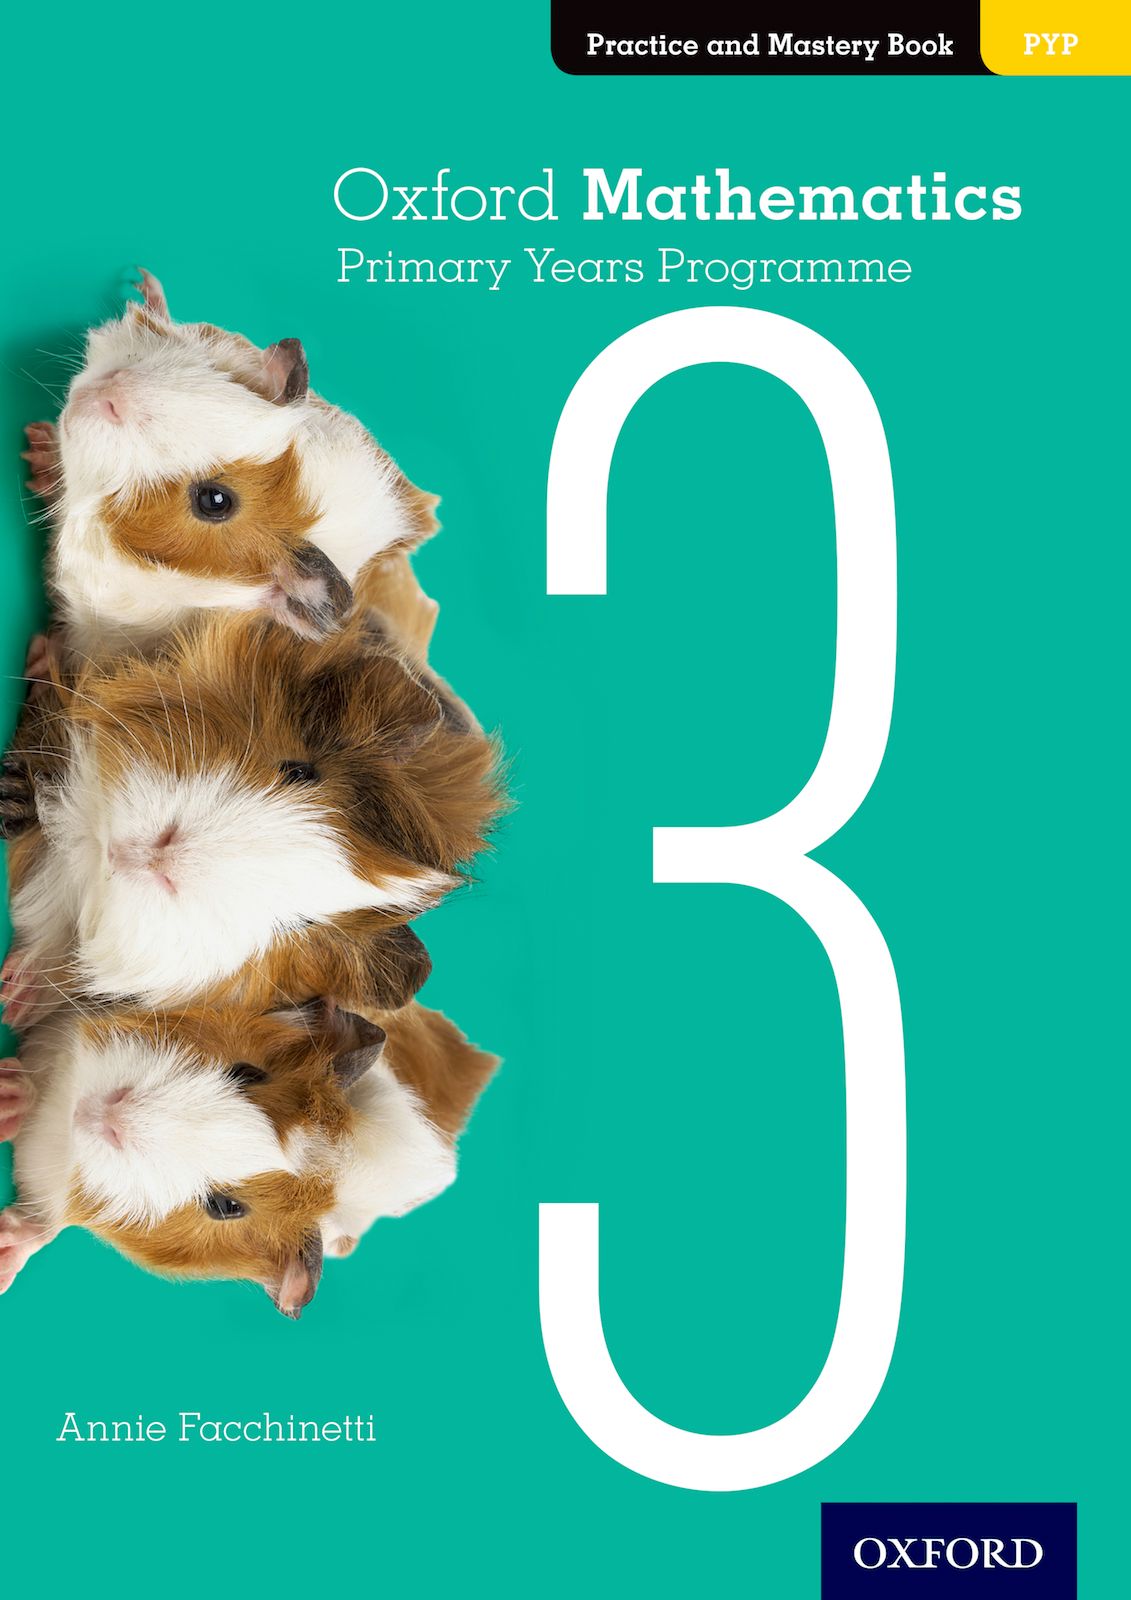 Featured image for “Oxford Mathematics Primary Years Programme Practice and Mastery Book 3”